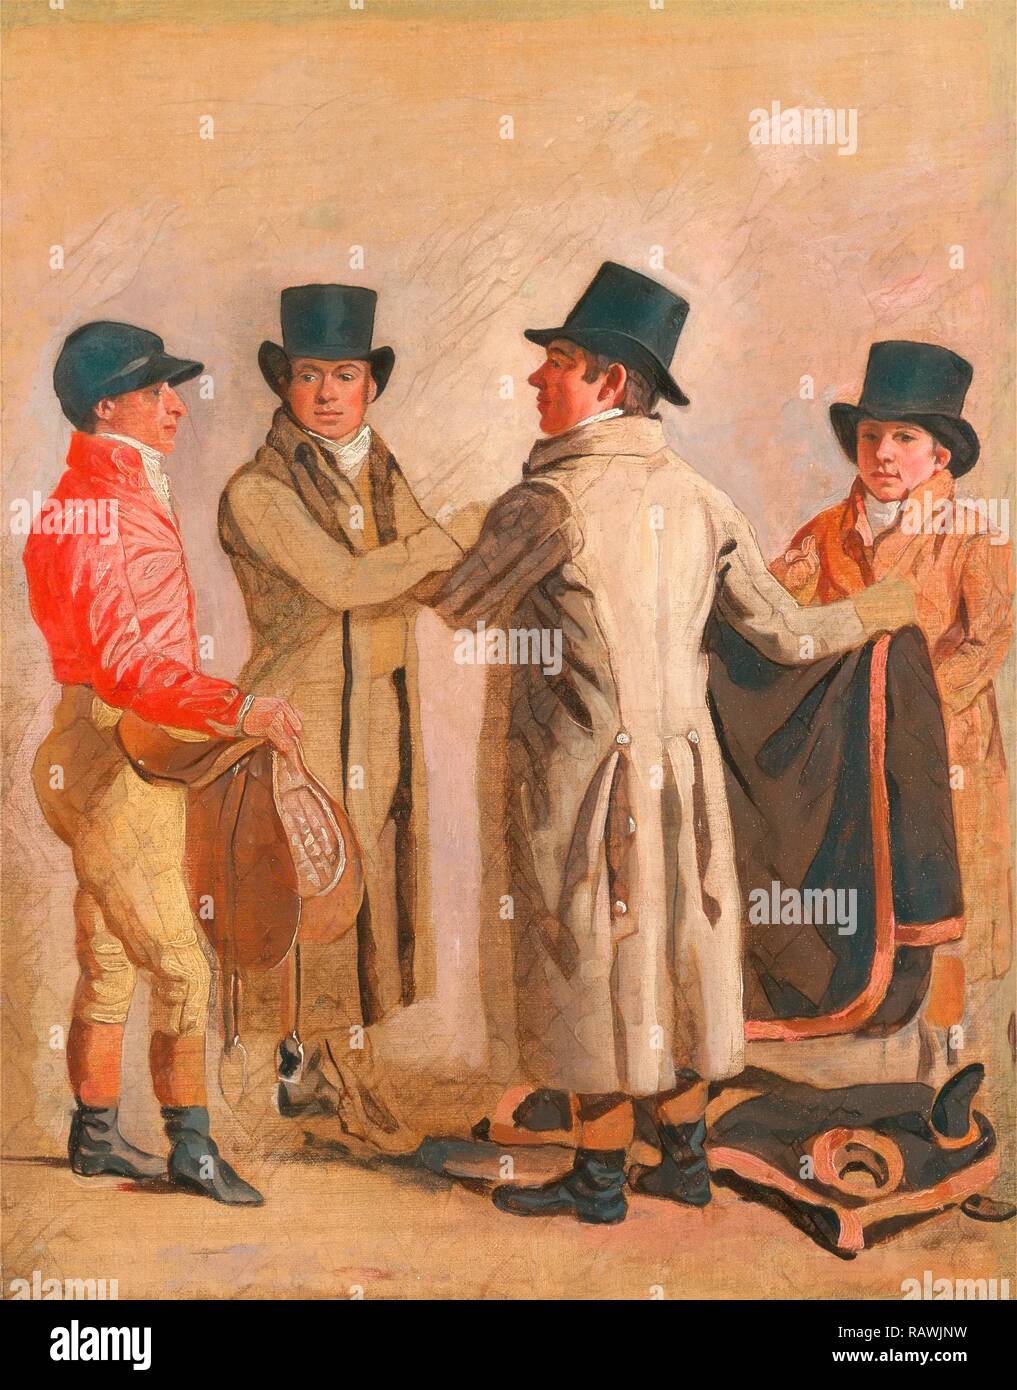 The Jockey Frank Buckle, the Owner-Breeder John Wastell, his Trainer Robert Robson, and a Stable-lad Frank Buckle reimagined Stock Photo